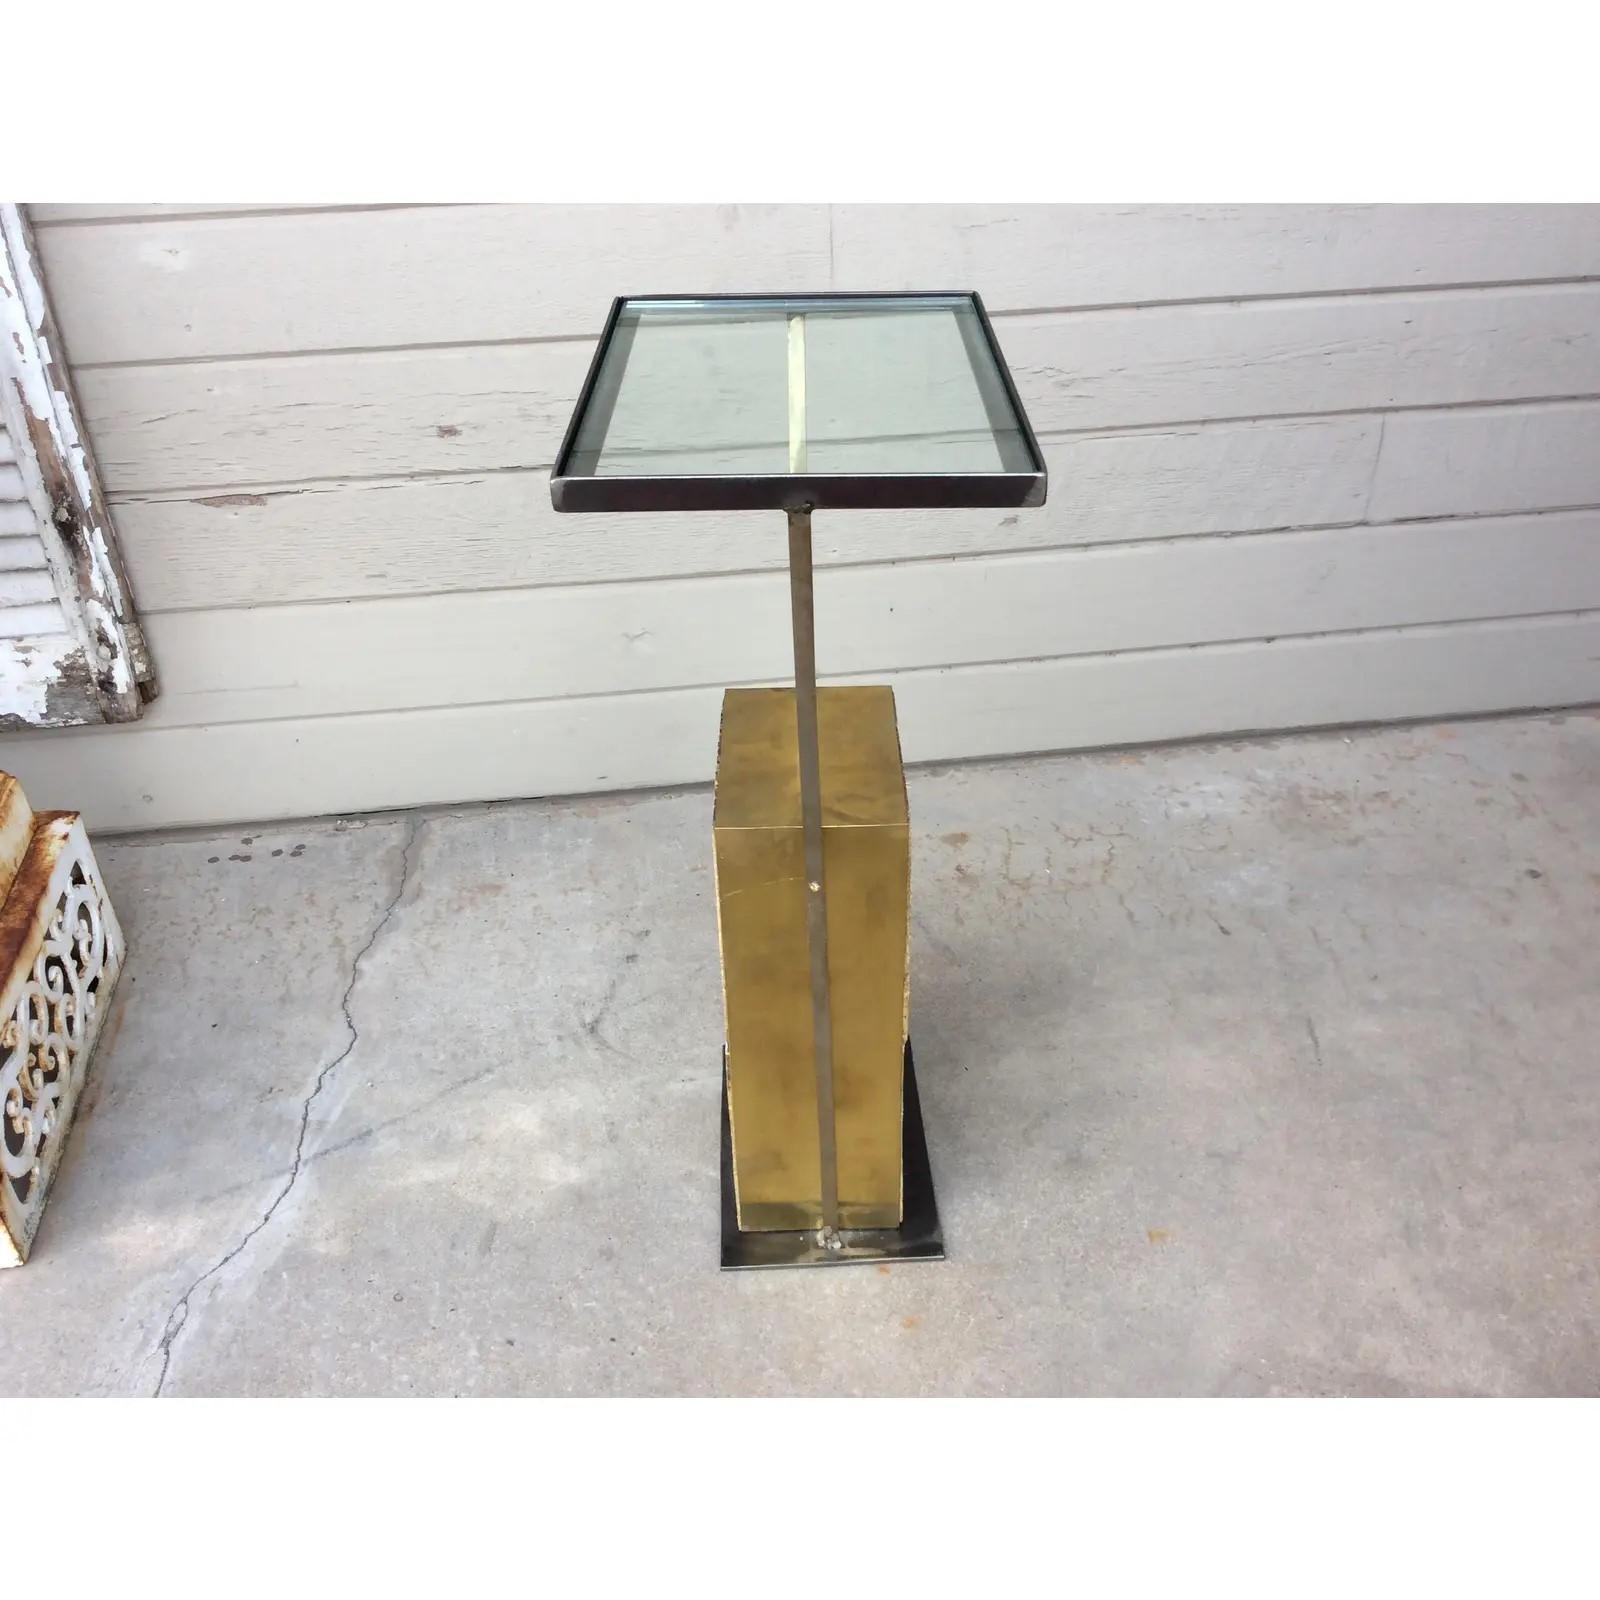 This Mid-Century Modern Brass and Glass Side Table is crafted from an original geometric style block obtained from a Mid-Century Modern building. The architectural block with its original patina, is lined on the outer edges with brass resting on an